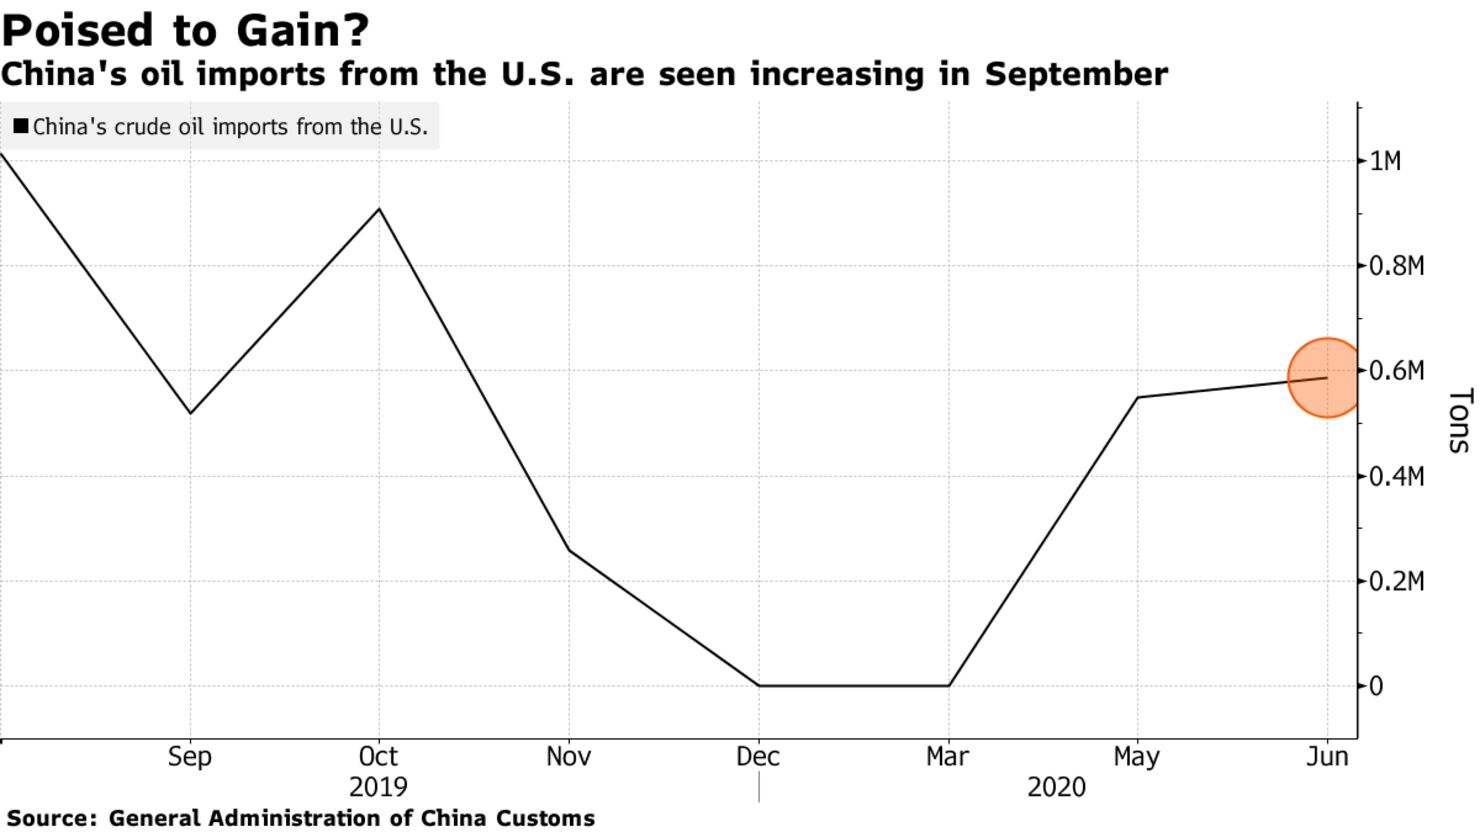 China's oil imports from the U.S. are seen increasing in September